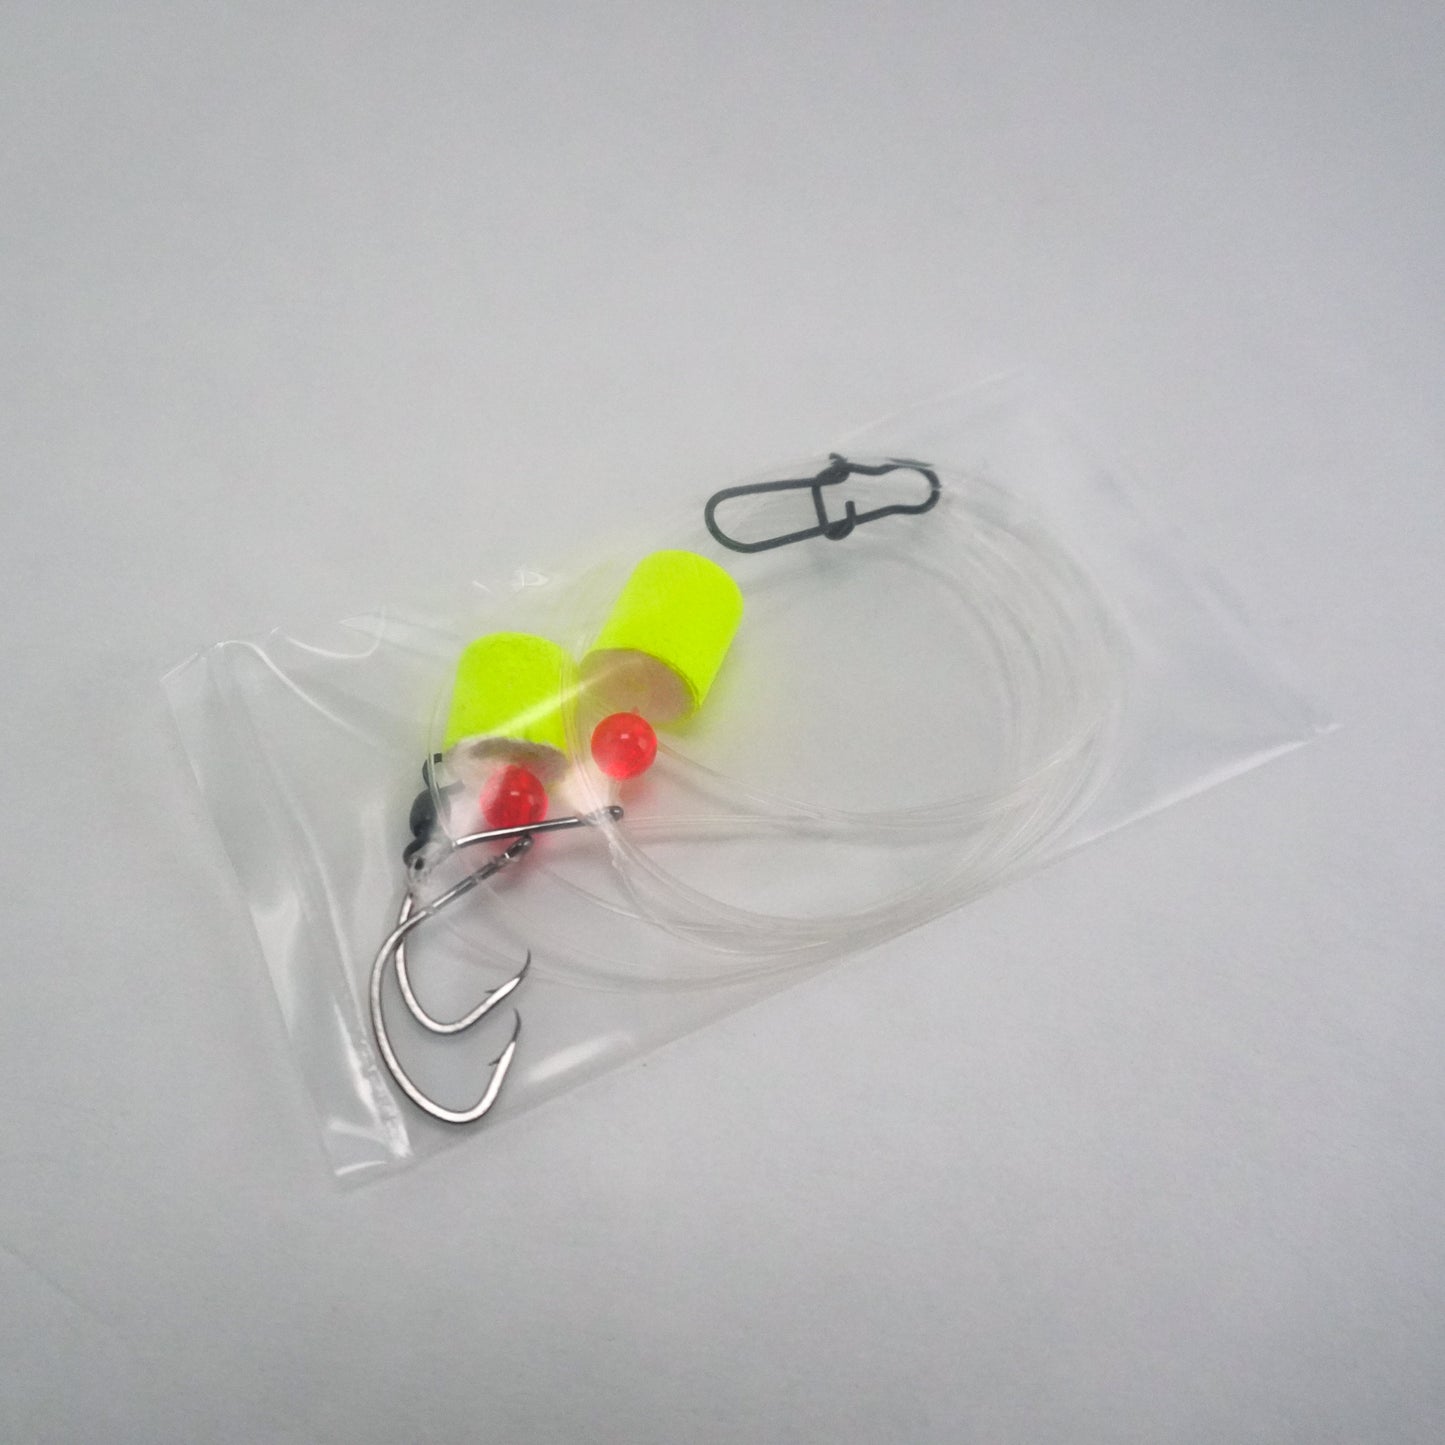 Pompano rig with Float (2pk)